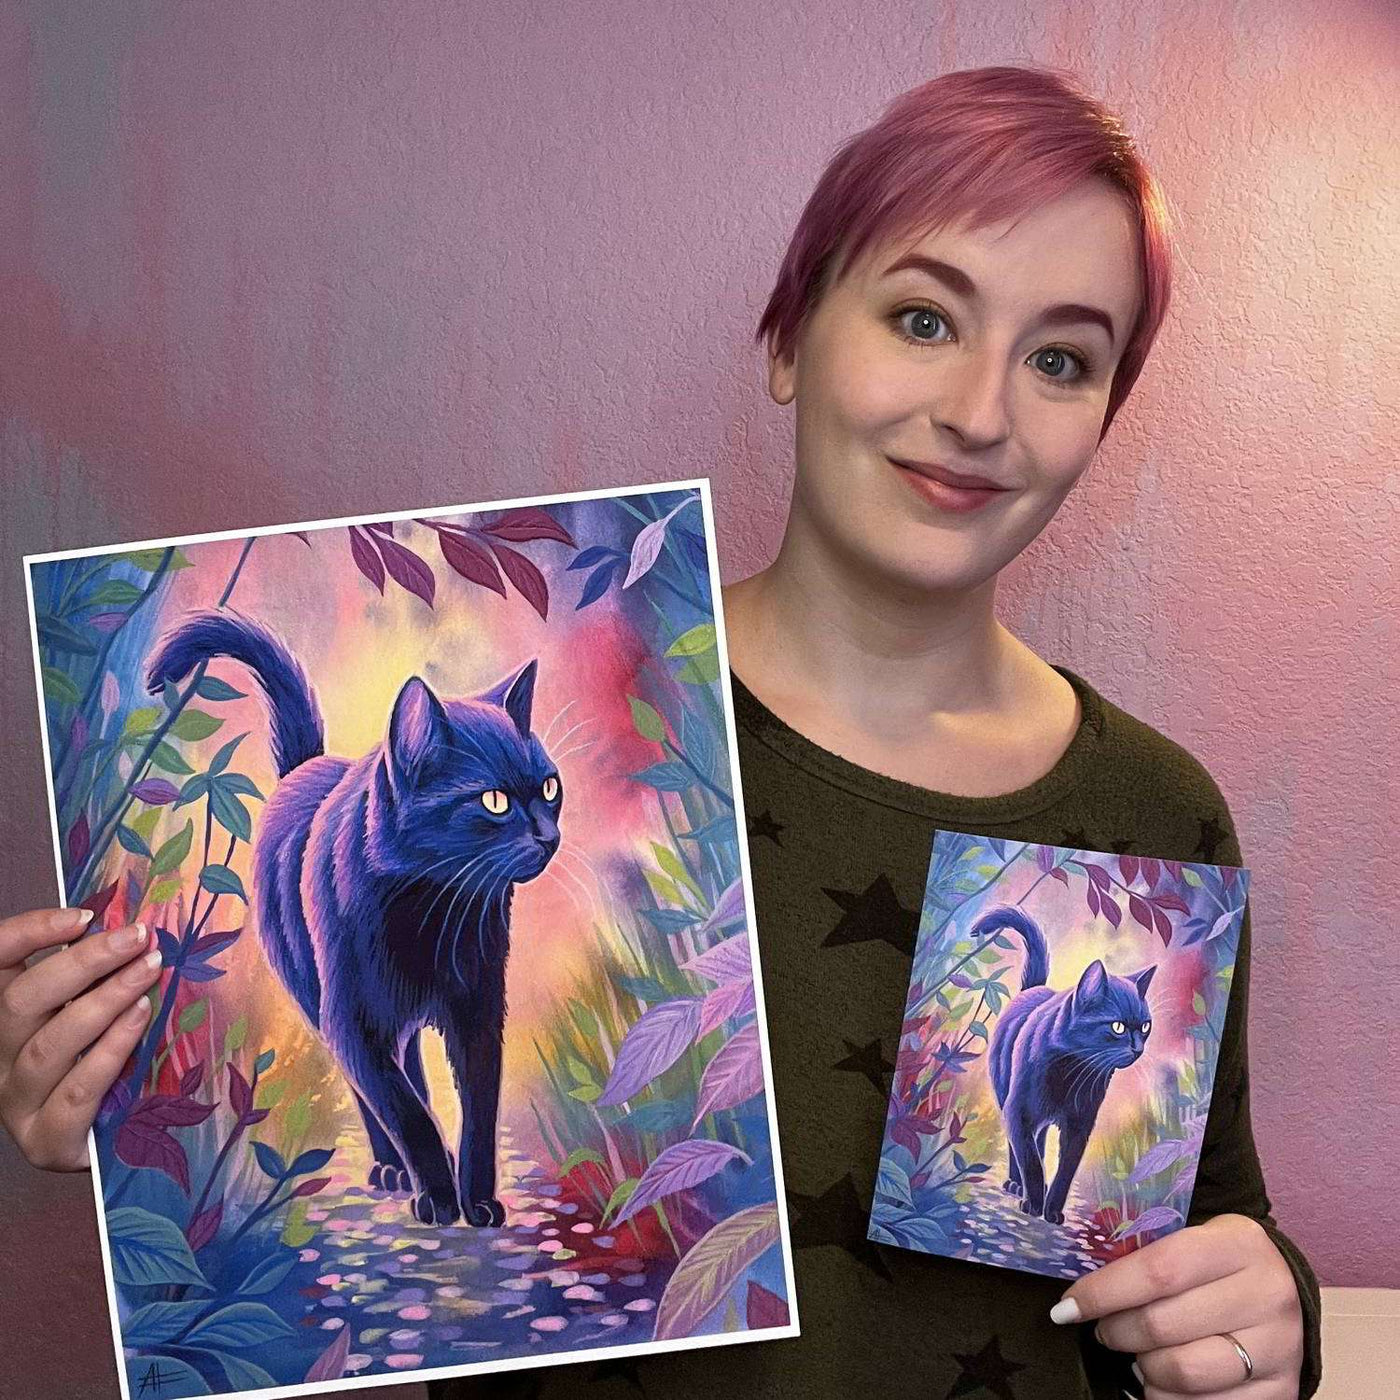 A woman with short pink hair smiles while holding up a large and a small print of "The Cat (Twilight Watch)" featuring a black cat in a colorful forest.